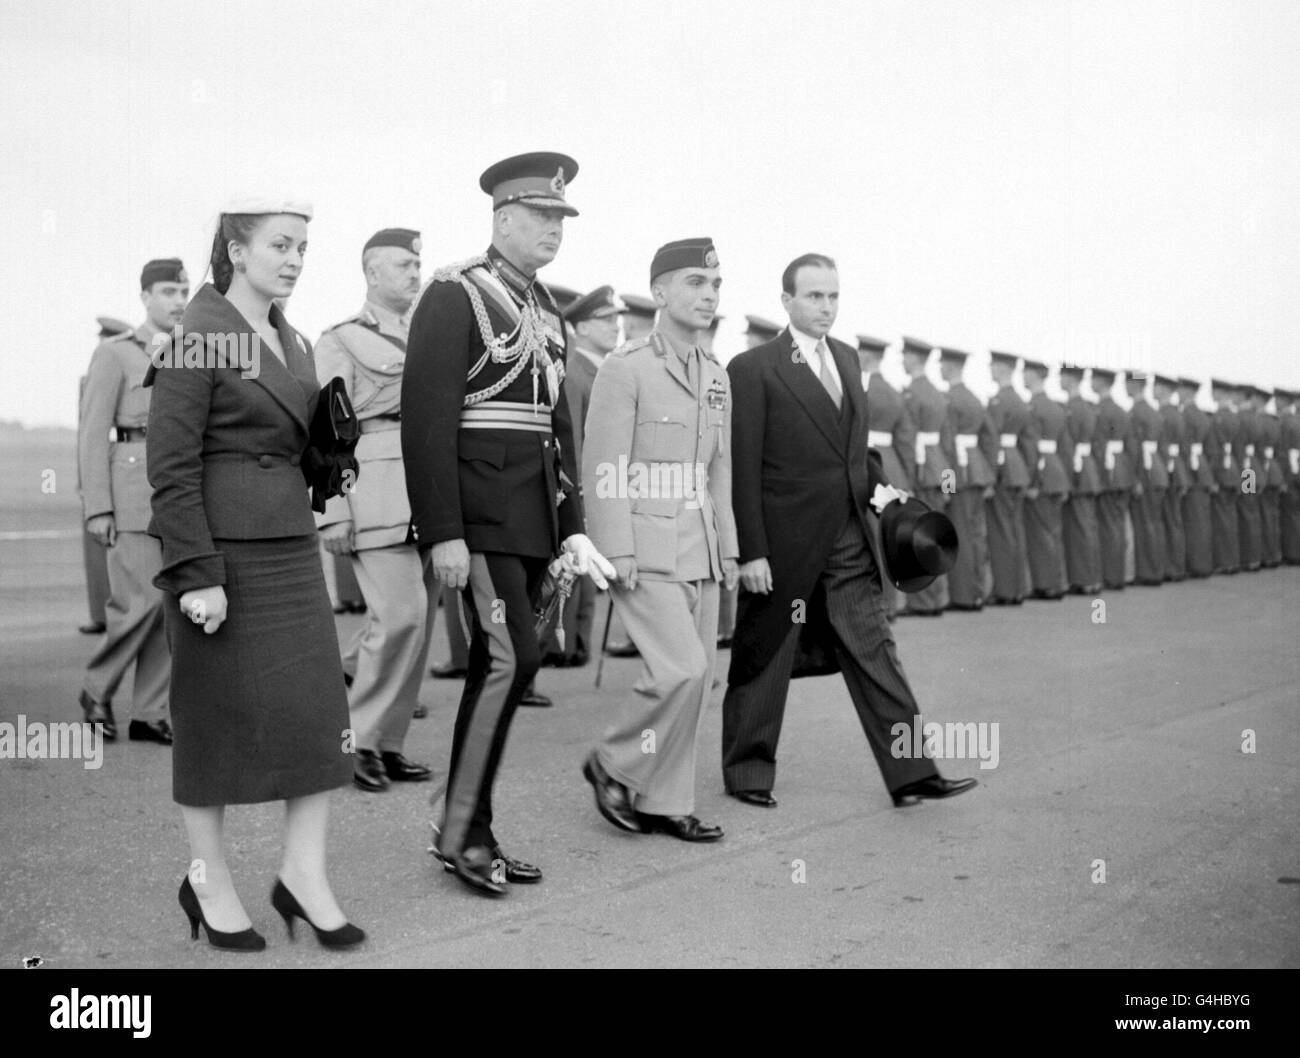 king-hussein-and-queen-dina-arrive-in-britain-G4HBYG.jpg